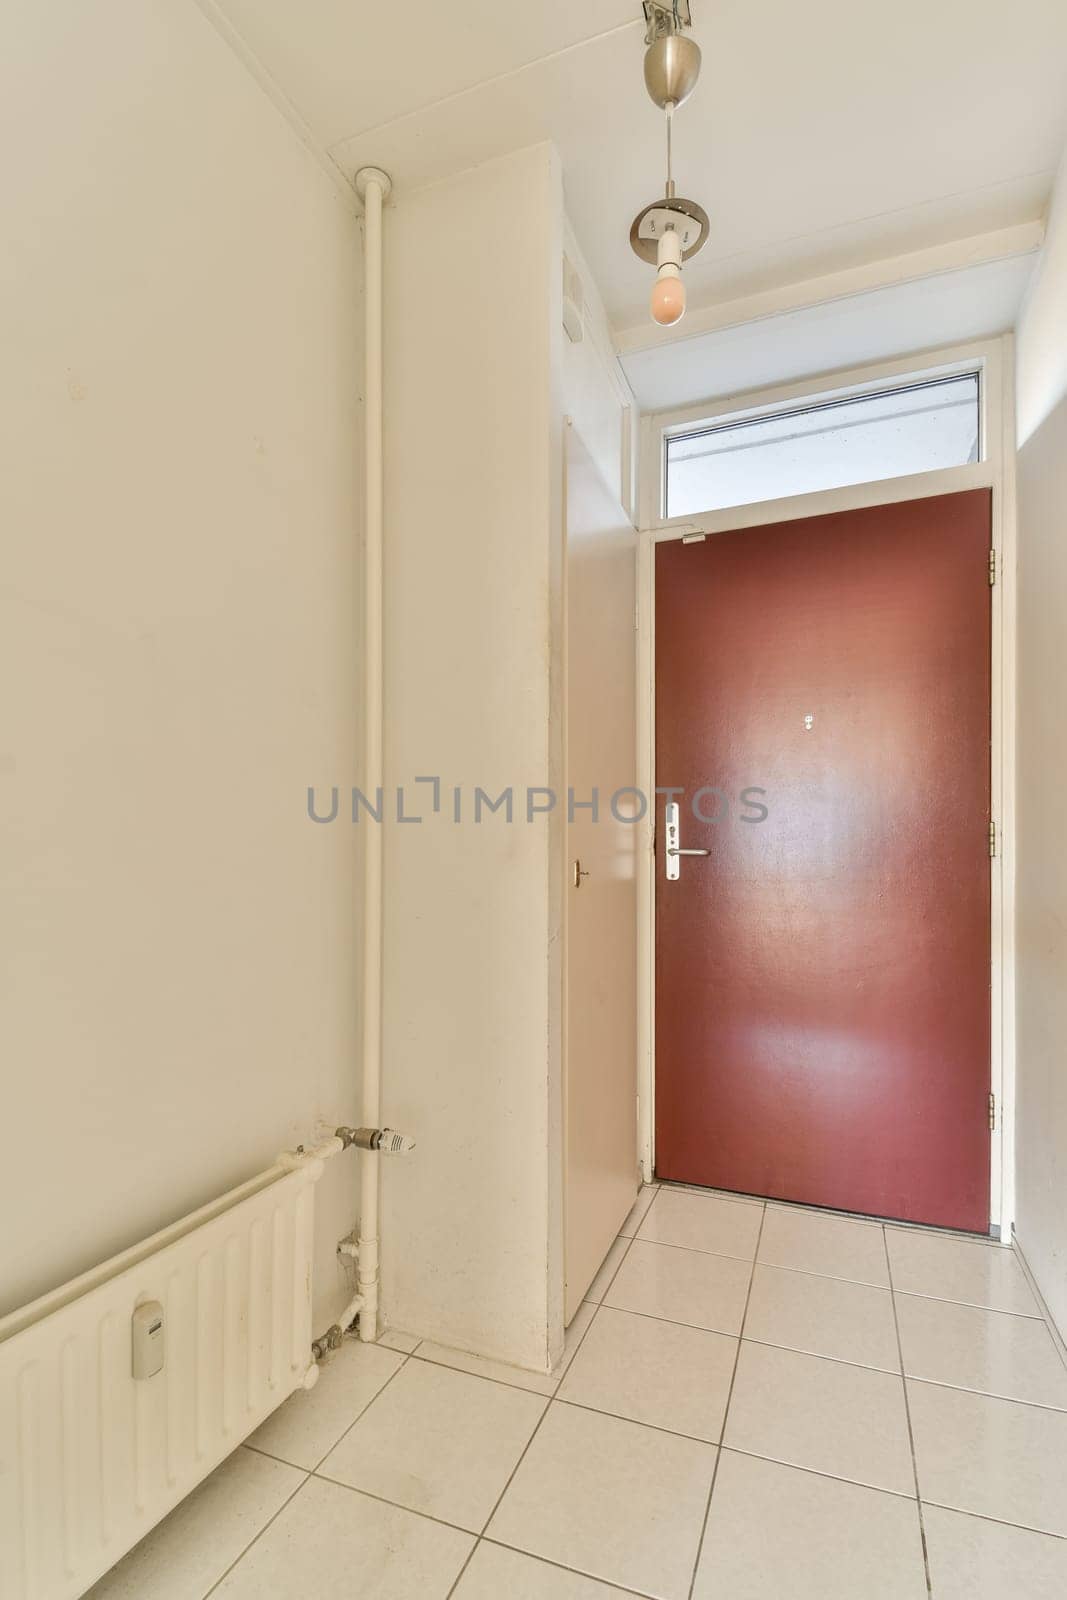 an empty room with a red door and white tiles on the floor in this photo is taken from the inside